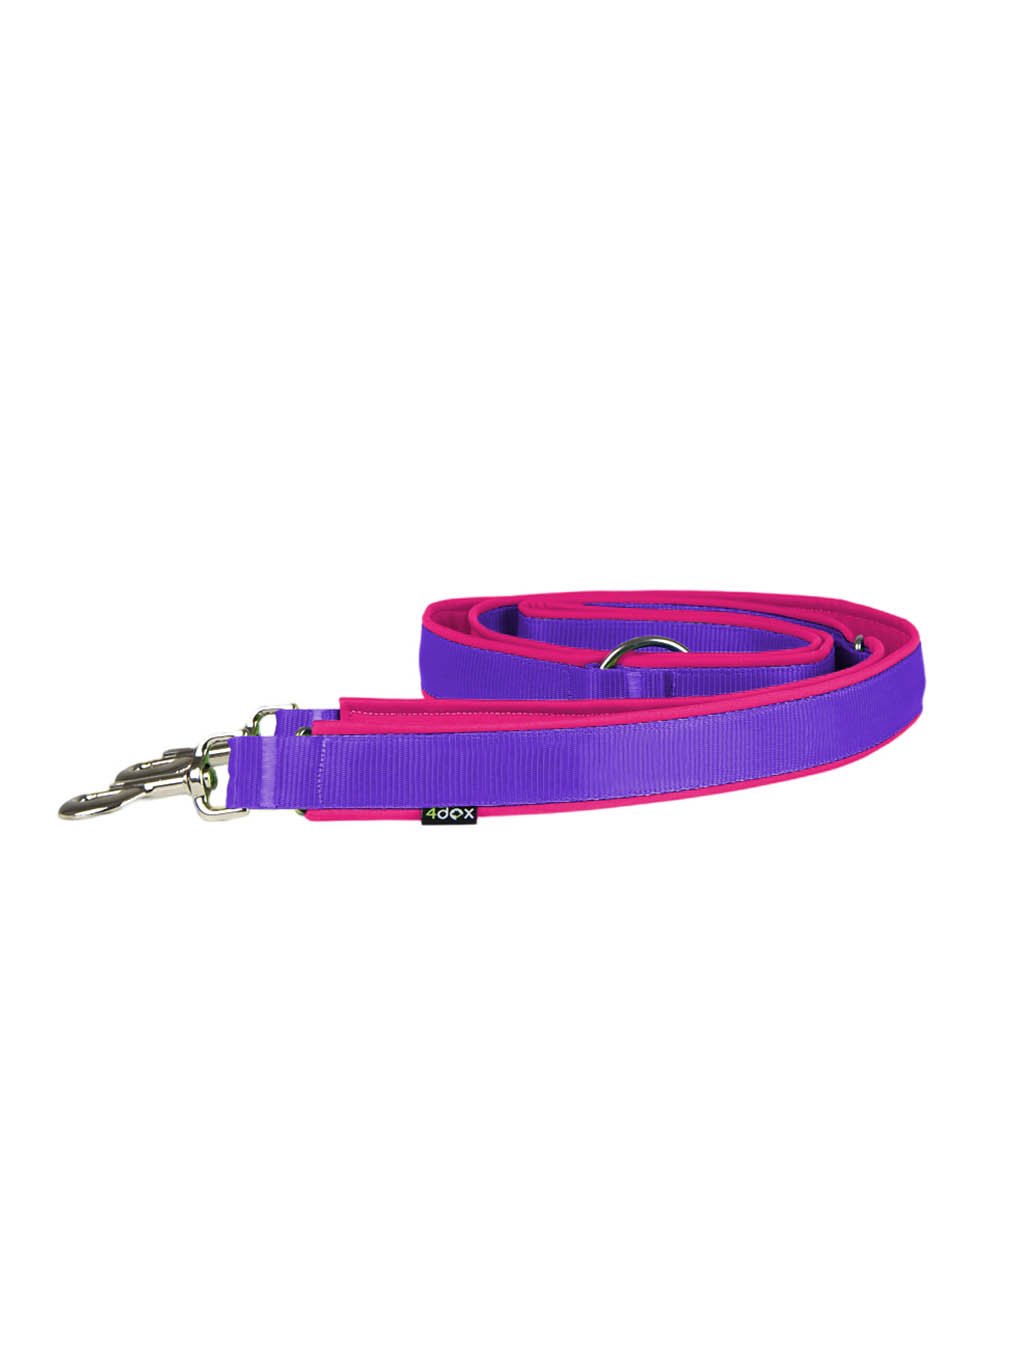 Switch guide - customized leash